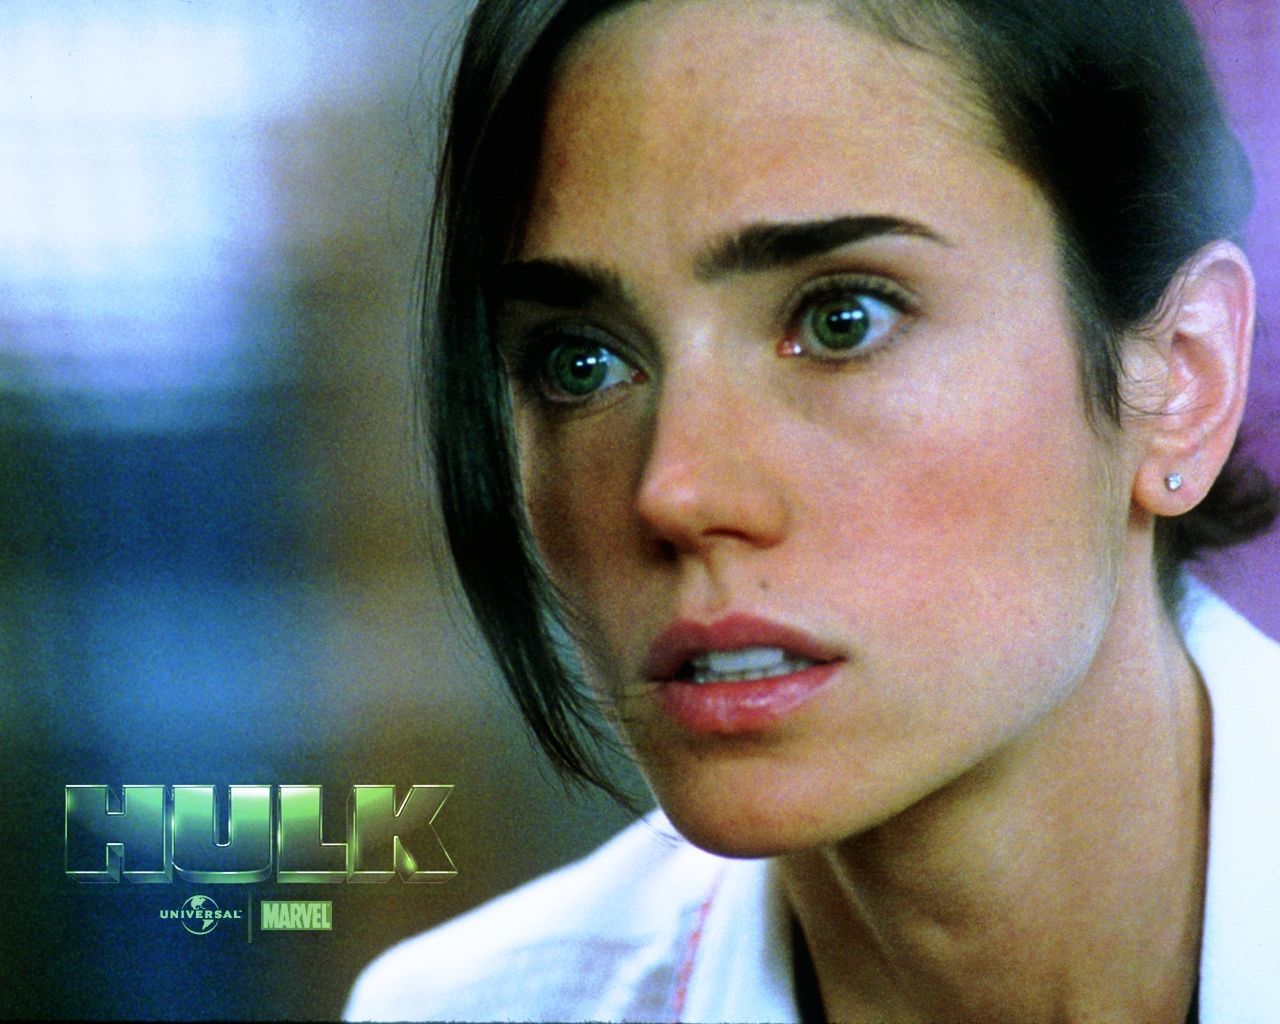 Hulk computer wallpaper, 2003. Jennifer Connelly as Betty Ross. The second movie in the Marvel Cinemati. Jennifer connelly hulk, Jennifer connelly, Comic movies